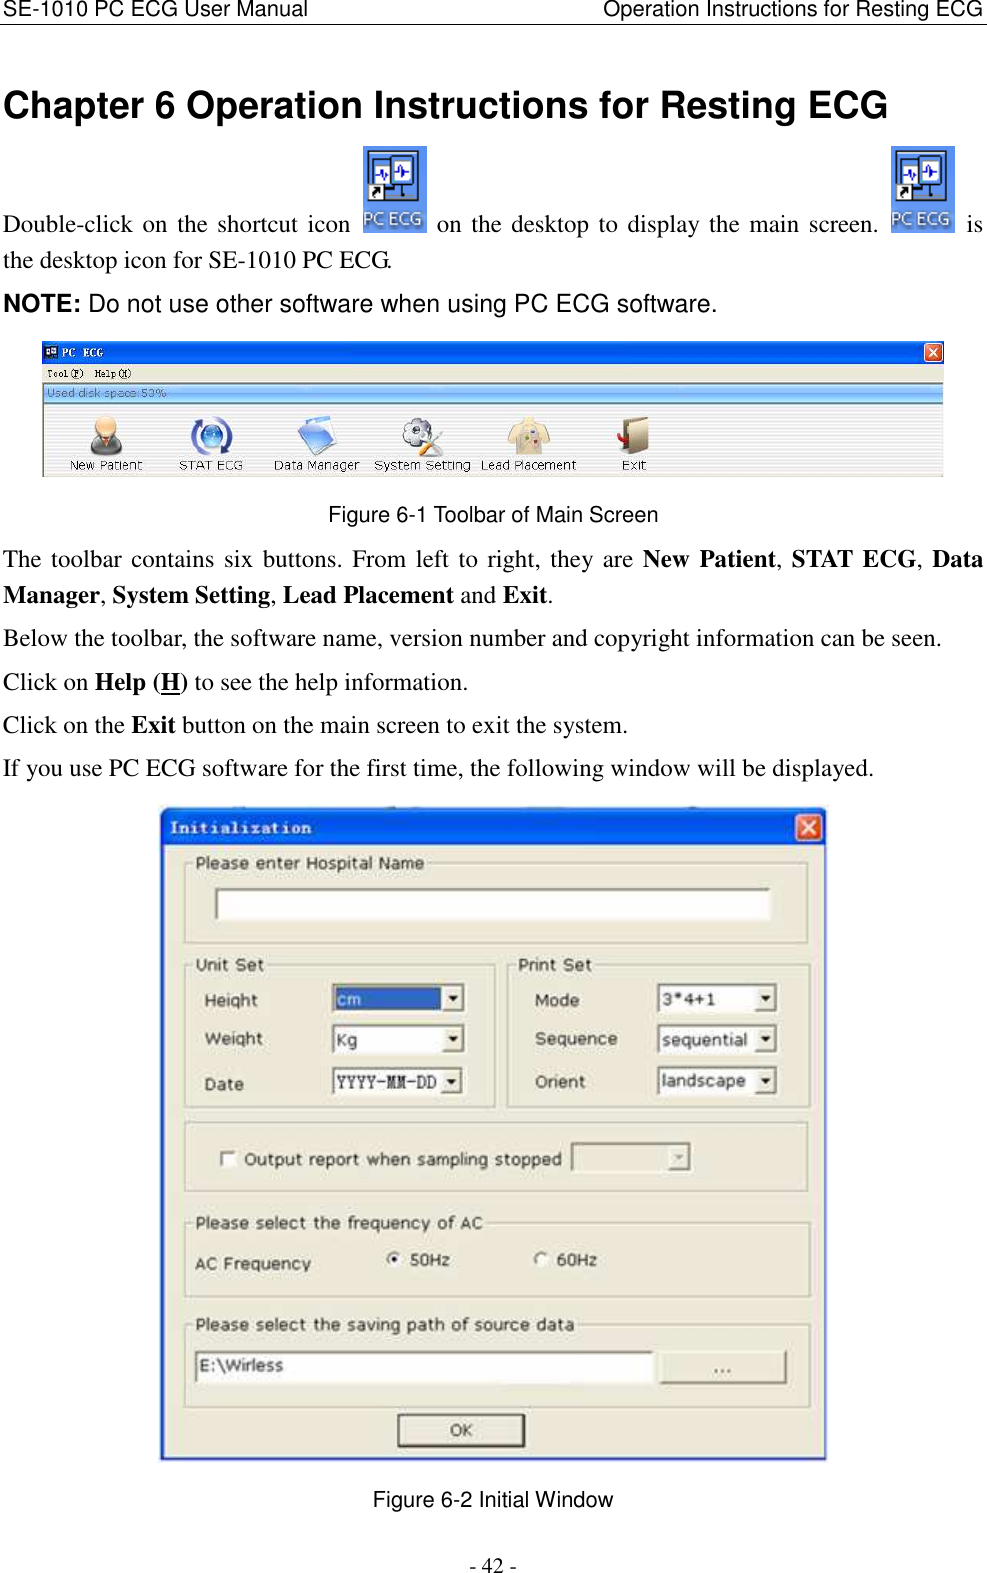 SE-1010 PC ECG User Manual                                                      Operation Instructions for Resting ECG - 42 - Chapter 6 Operation Instructions for Resting ECG Double-click on the shortcut icon  on the desktop to display the main screen.    is the desktop icon for SE-1010 PC ECG. NOTE: Do not use other software when using PC ECG software.  Figure 6-1 Toolbar of Main Screen The toolbar contains six buttons. From left to right, they are New Patient, STAT ECG, Data Manager, System Setting, Lead Placement and Exit. Below the toolbar, the software name, version number and copyright information can be seen. Click on Help (H) to see the help information. Click on the Exit button on the main screen to exit the system. If you use PC ECG software for the first time, the following window will be displayed.  Figure 6-2 Initial Window 